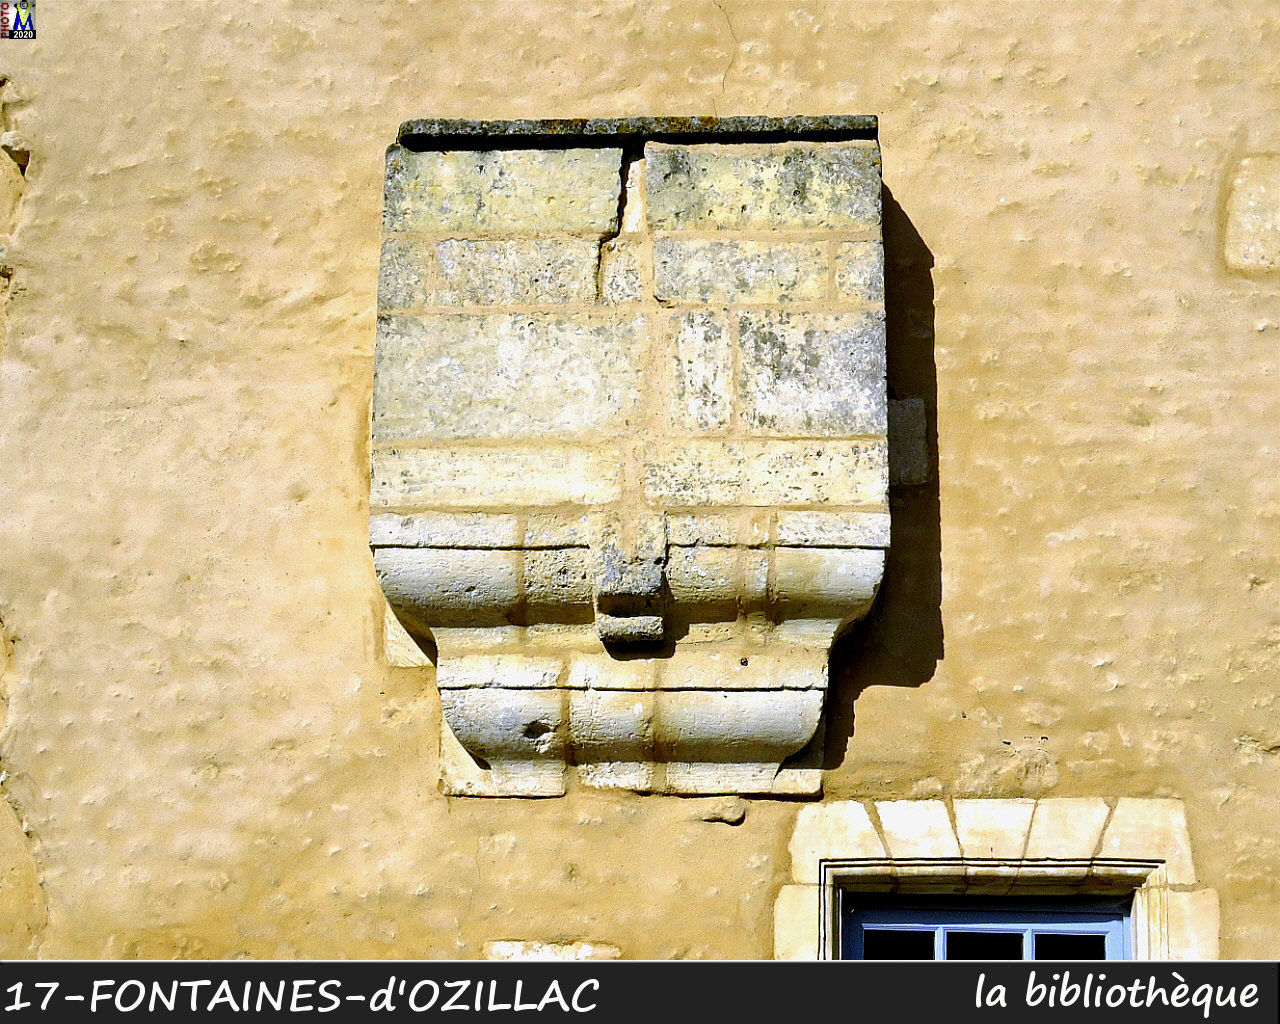 17FONTAINE-OZILLAC_bibliotheque_1002.jpg